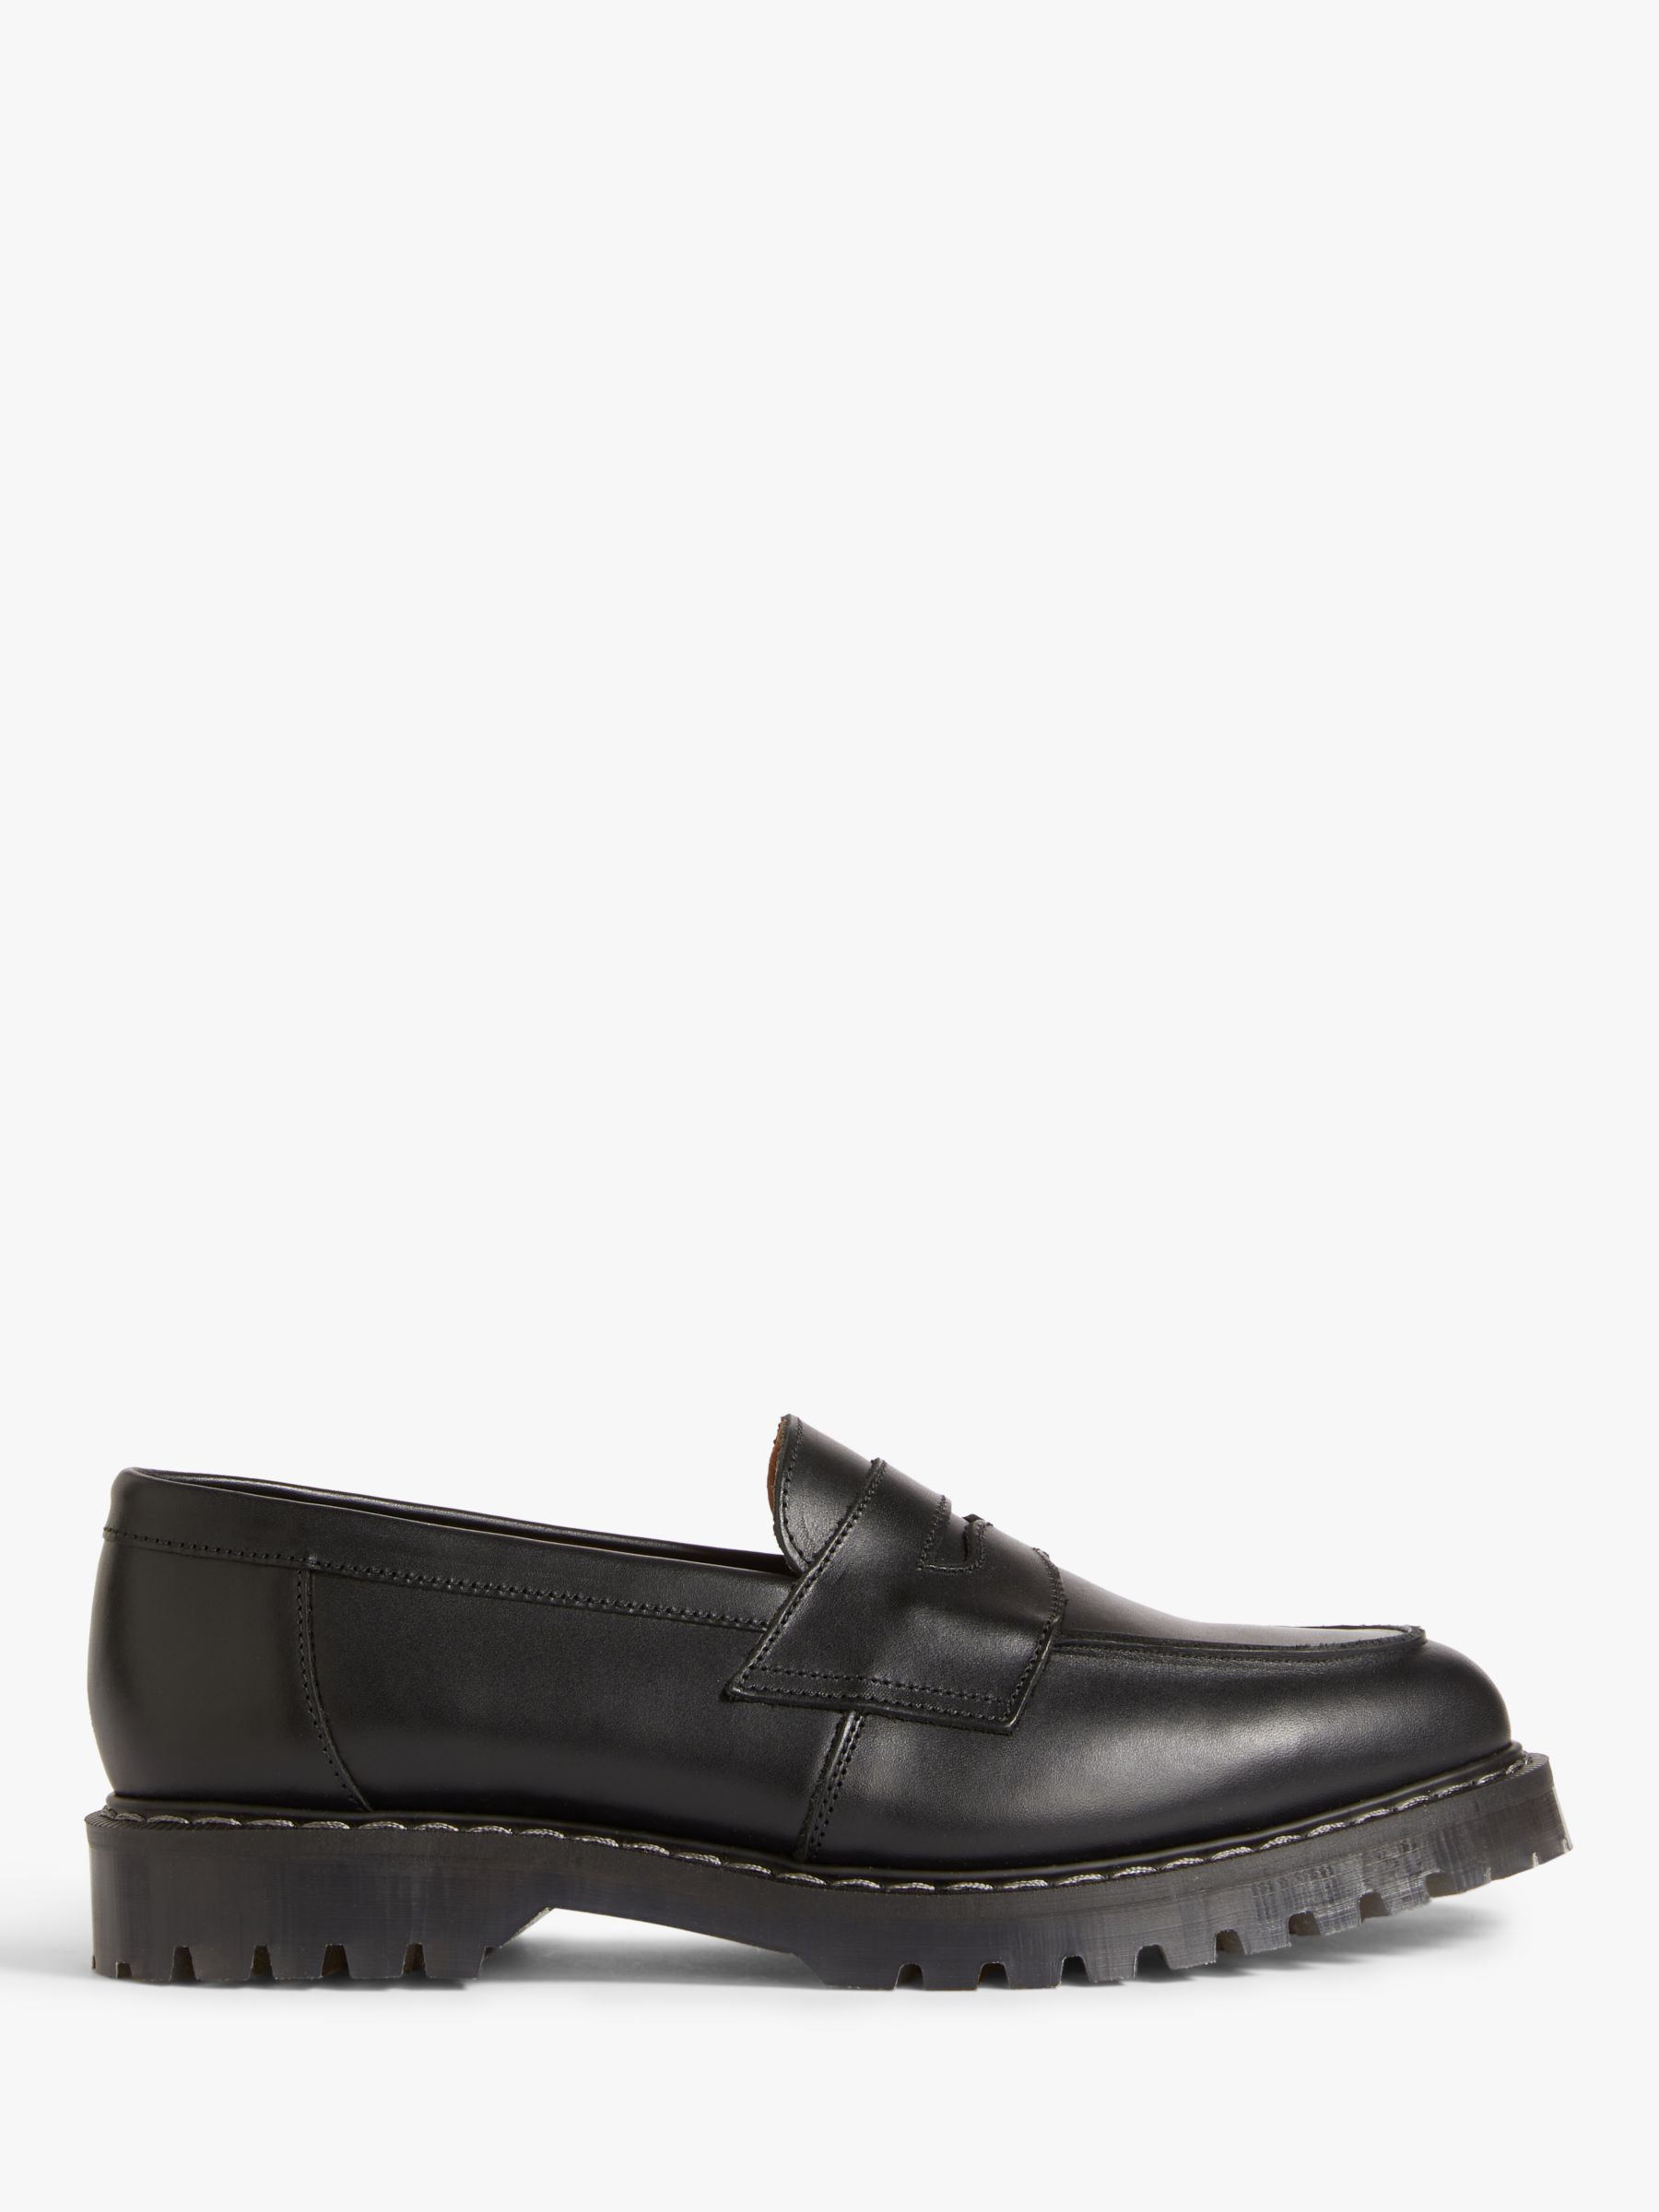 Solovair Waxy Penny Loafers, Black